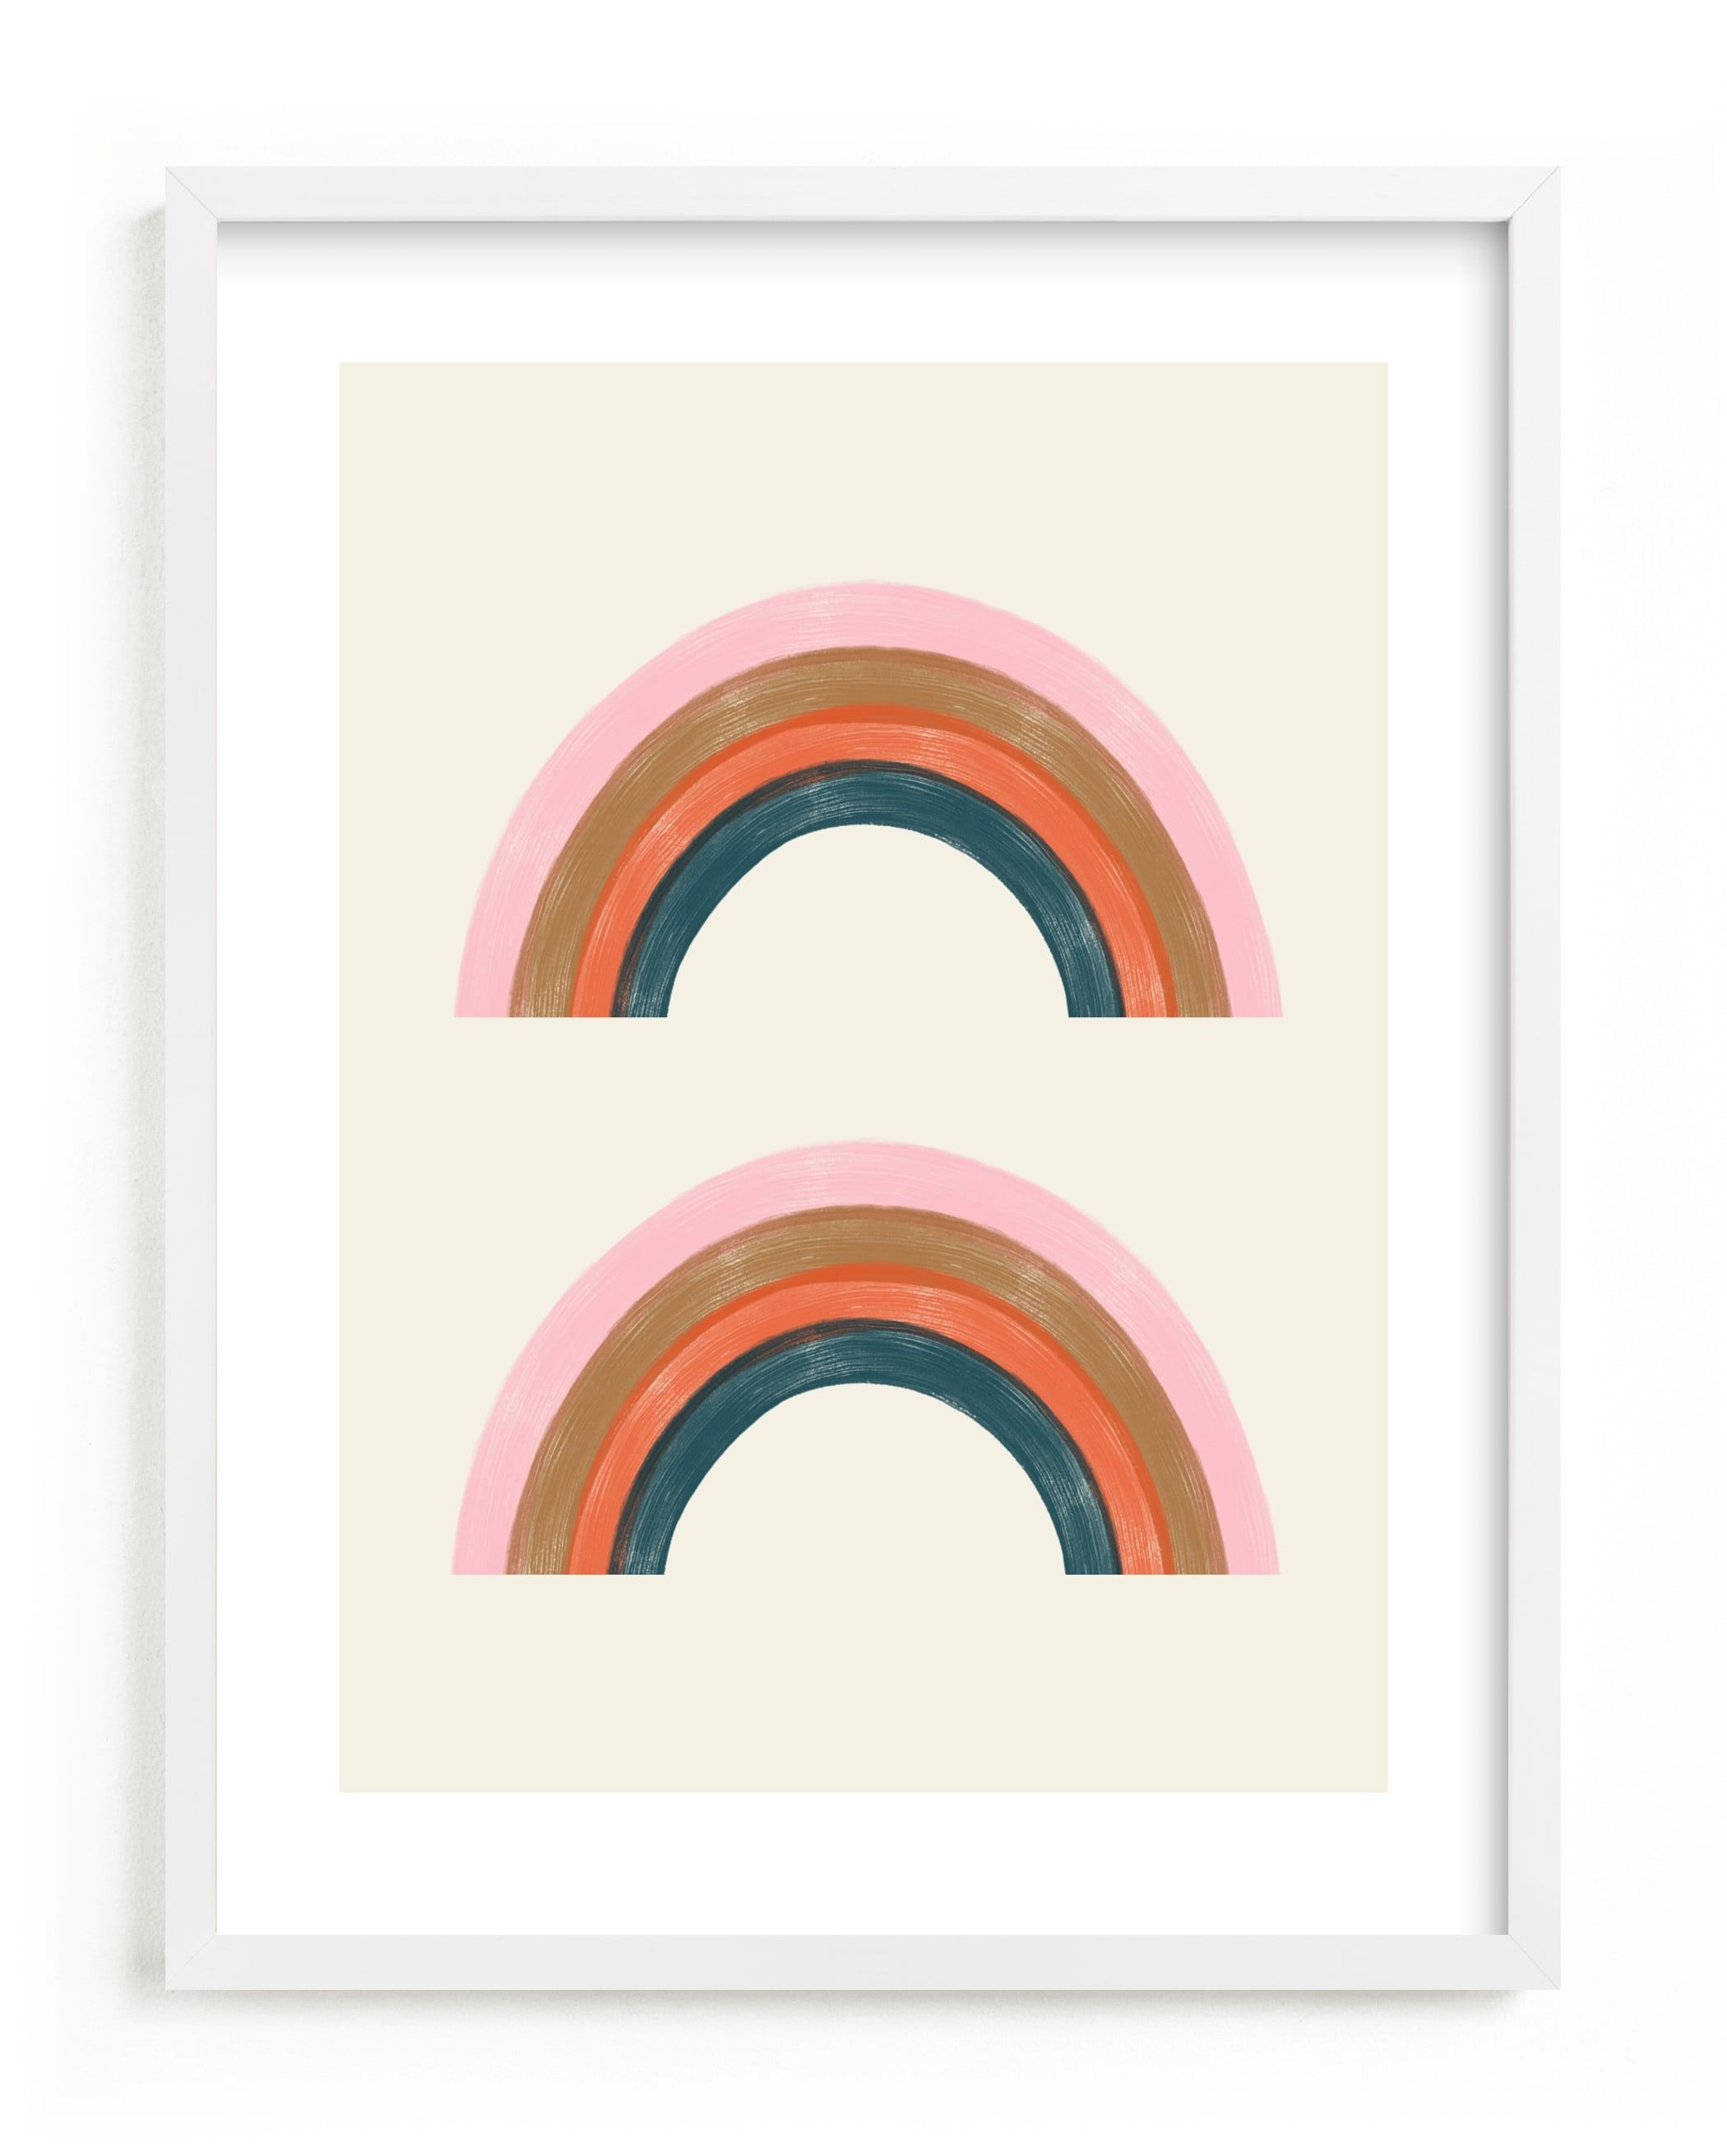 "Double Vintage Rainbow" - Painting Limited Edition Art Print by EMANUELA CARRATONI. | Minted